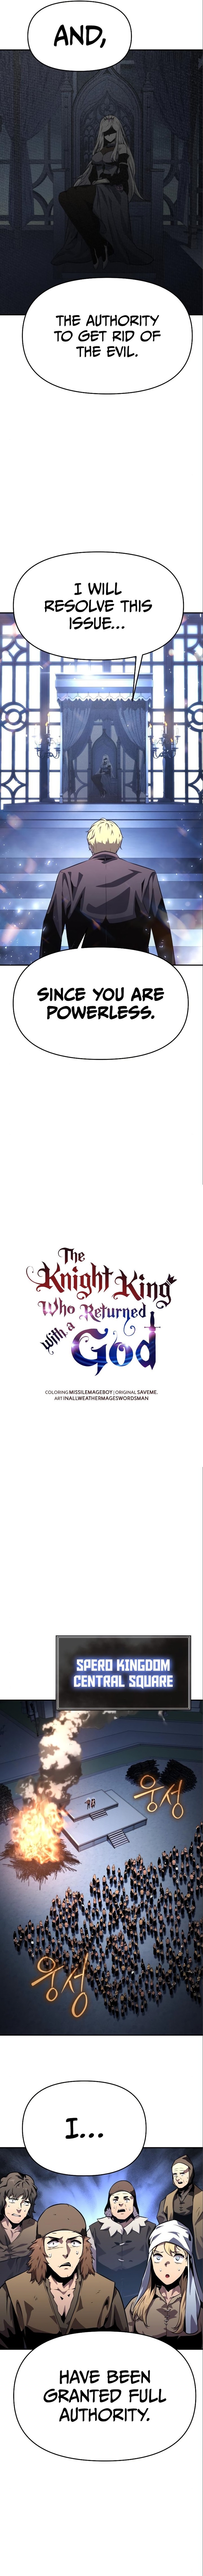 the_knight_king_who_returned_with_a_god_27_11